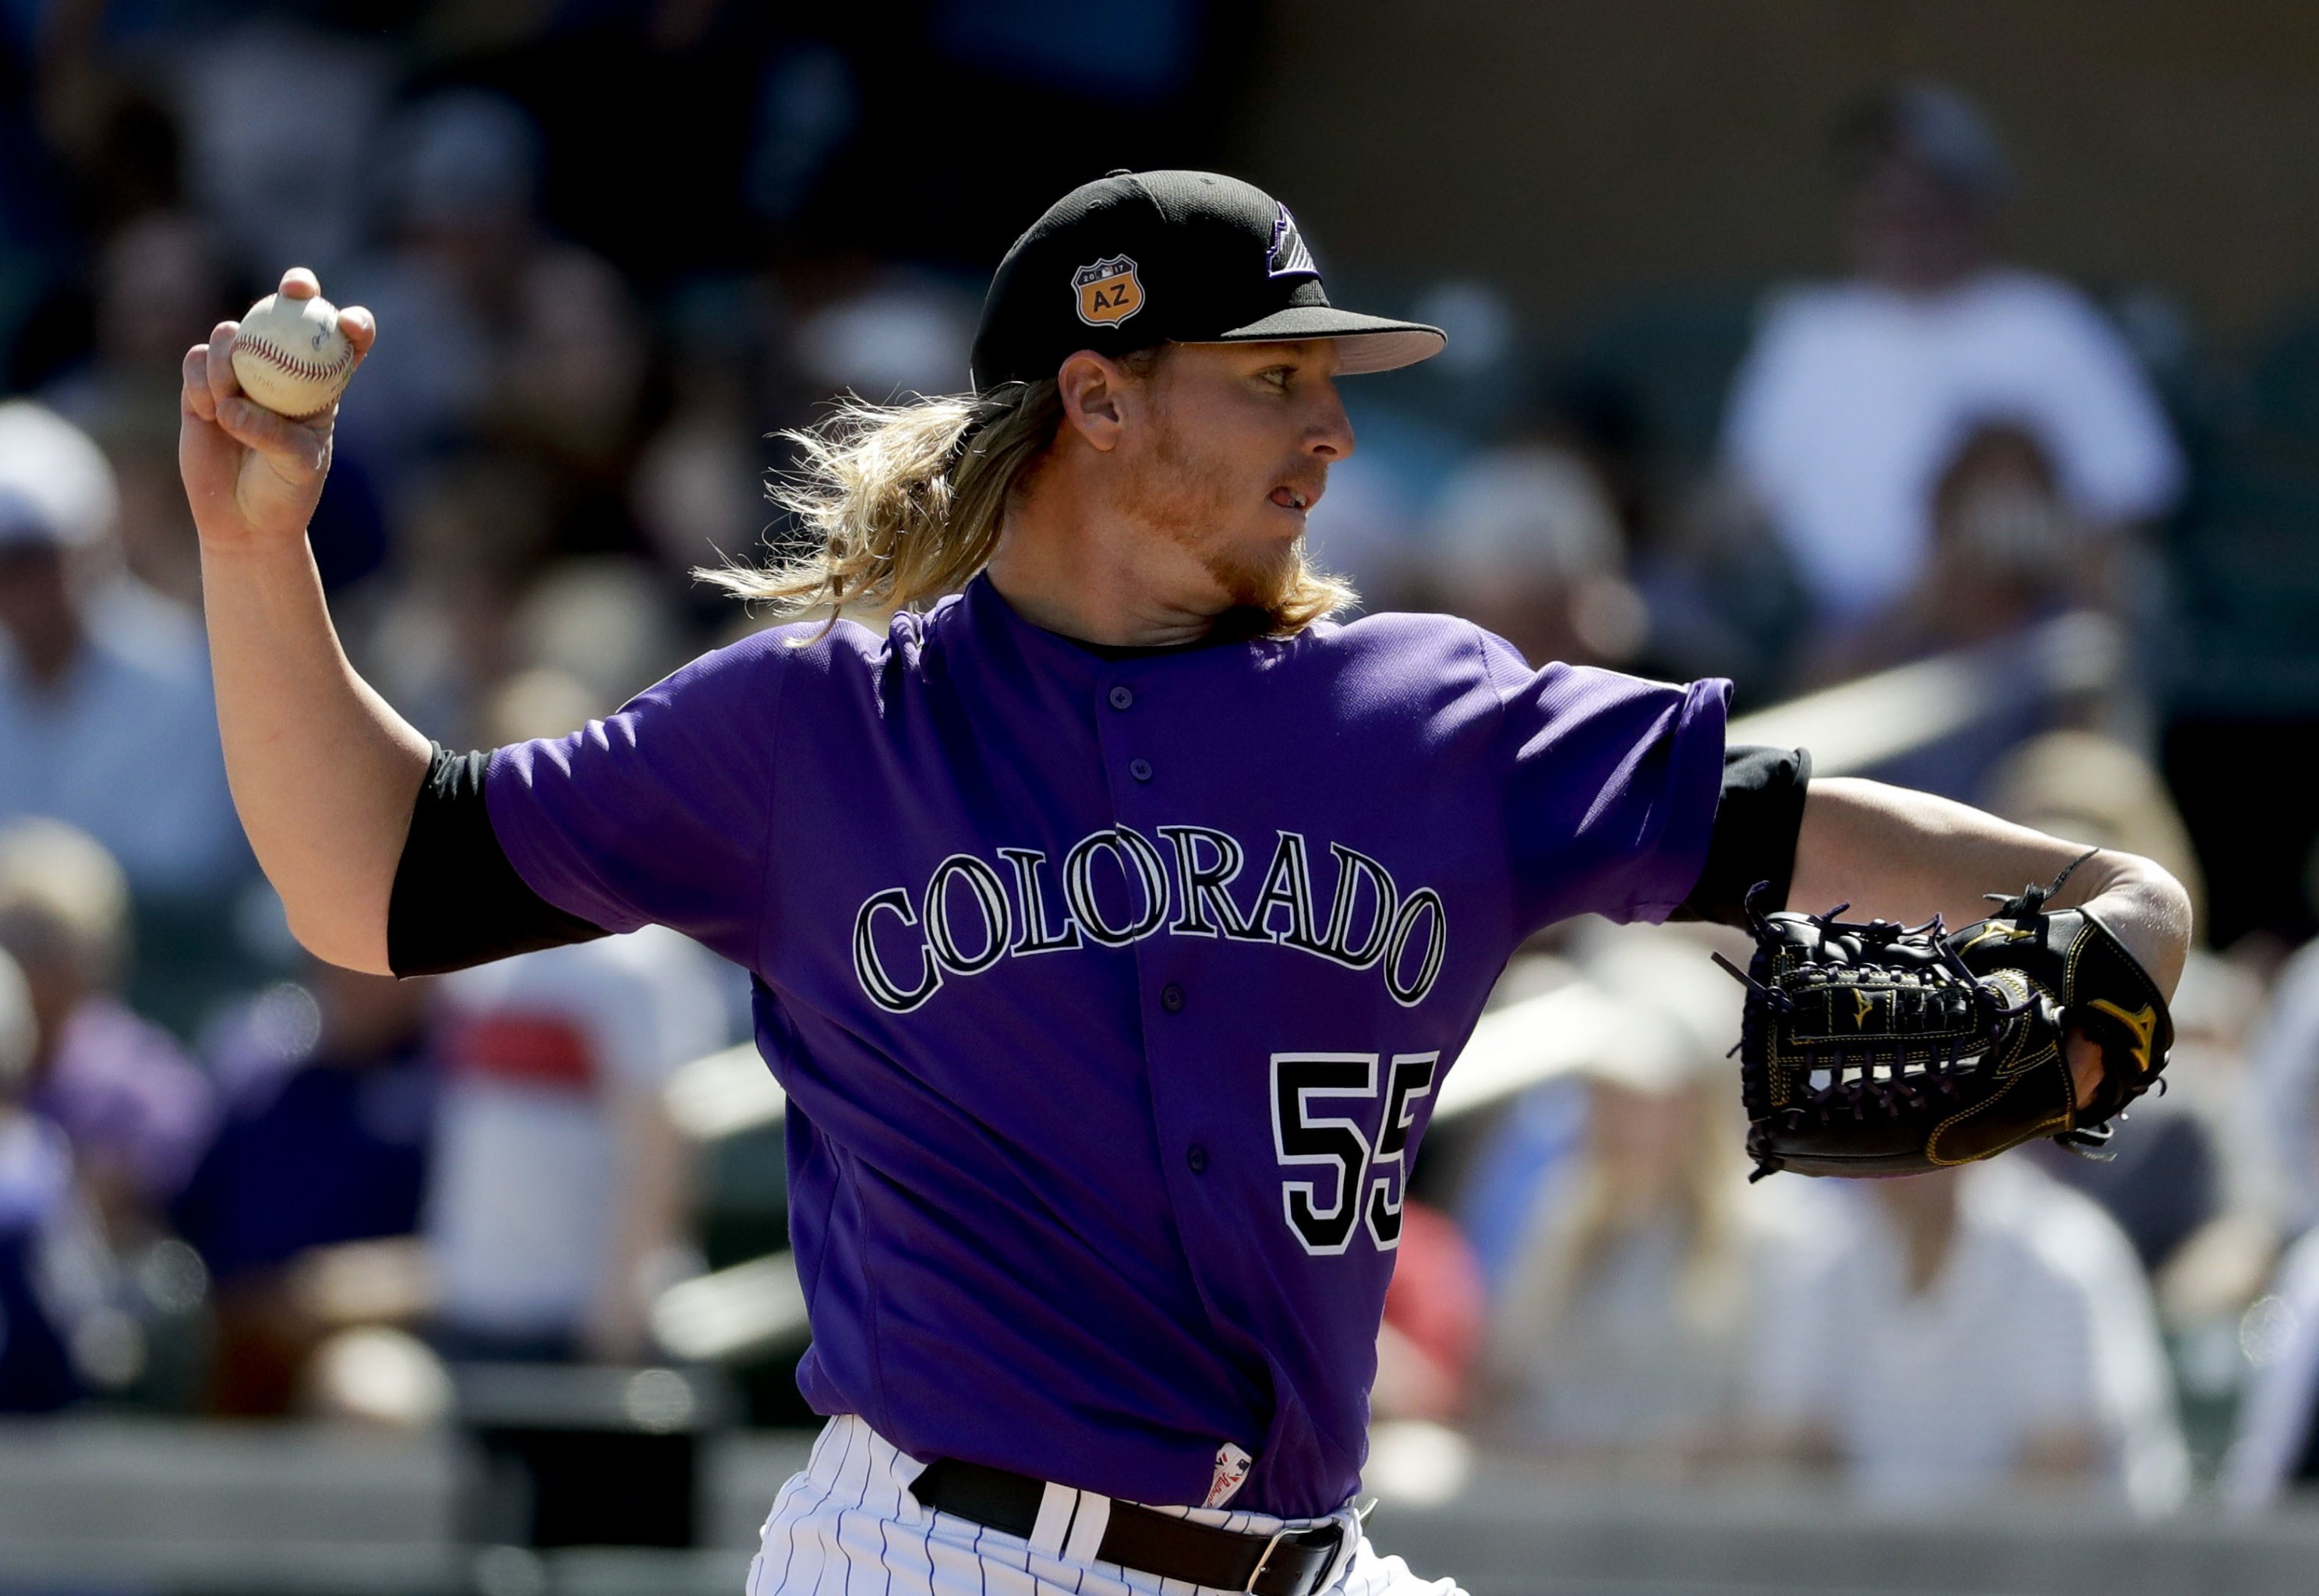 Seunghwan Oh's tenure in Rockies' uniform likely done with elbow